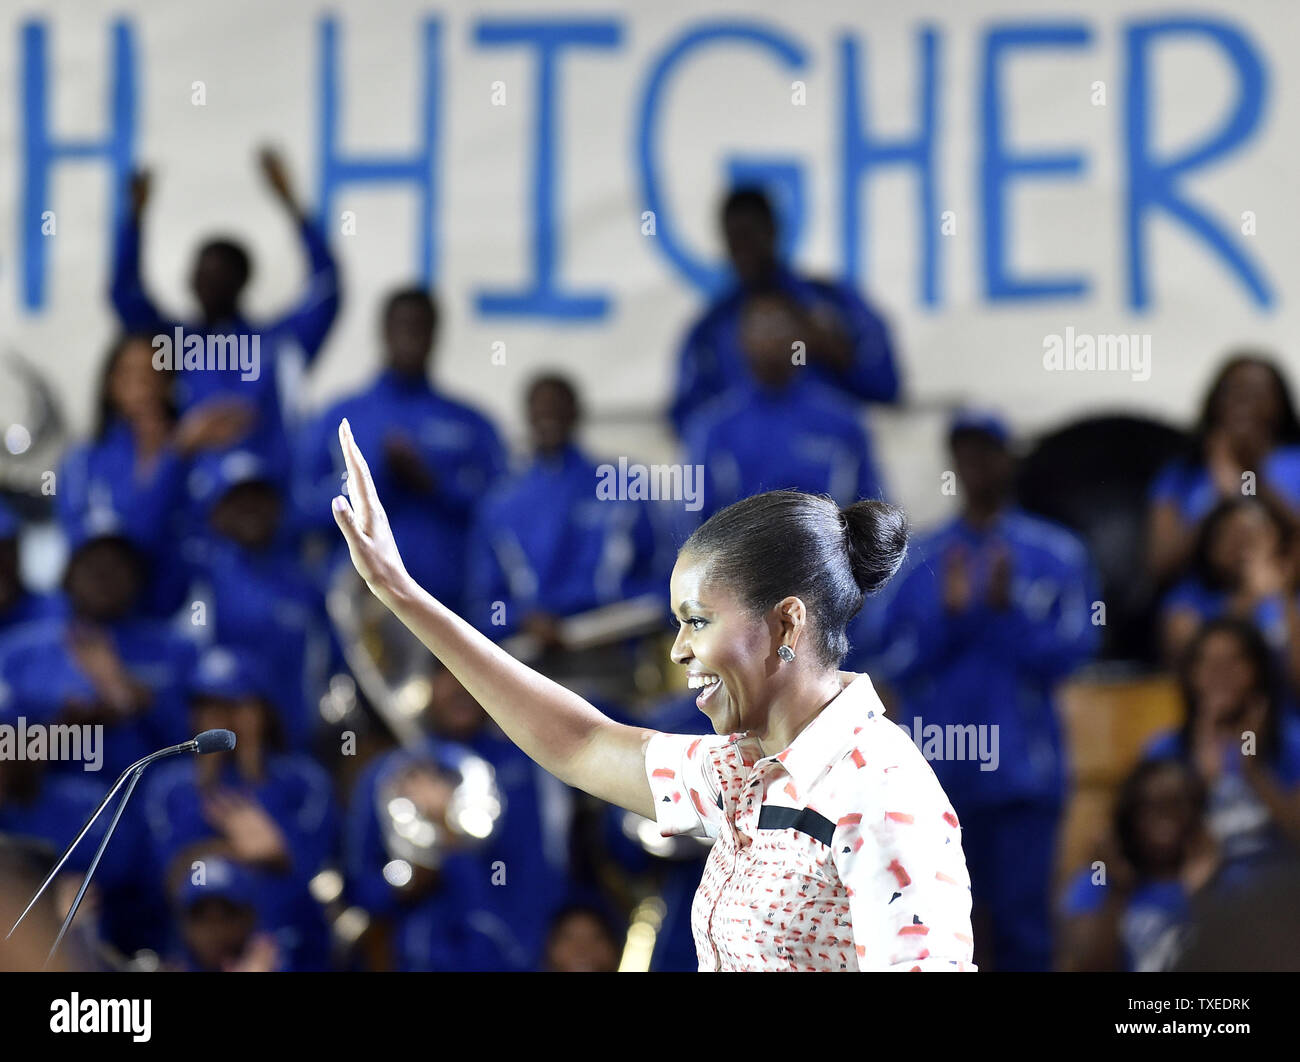 First Lady Michelle Obama waves to the crowd gathered at Booker T. Washington high school during a Reach Higher education rally with students on September 8, in Atlanta. UPI/David Tulis Stock Photo